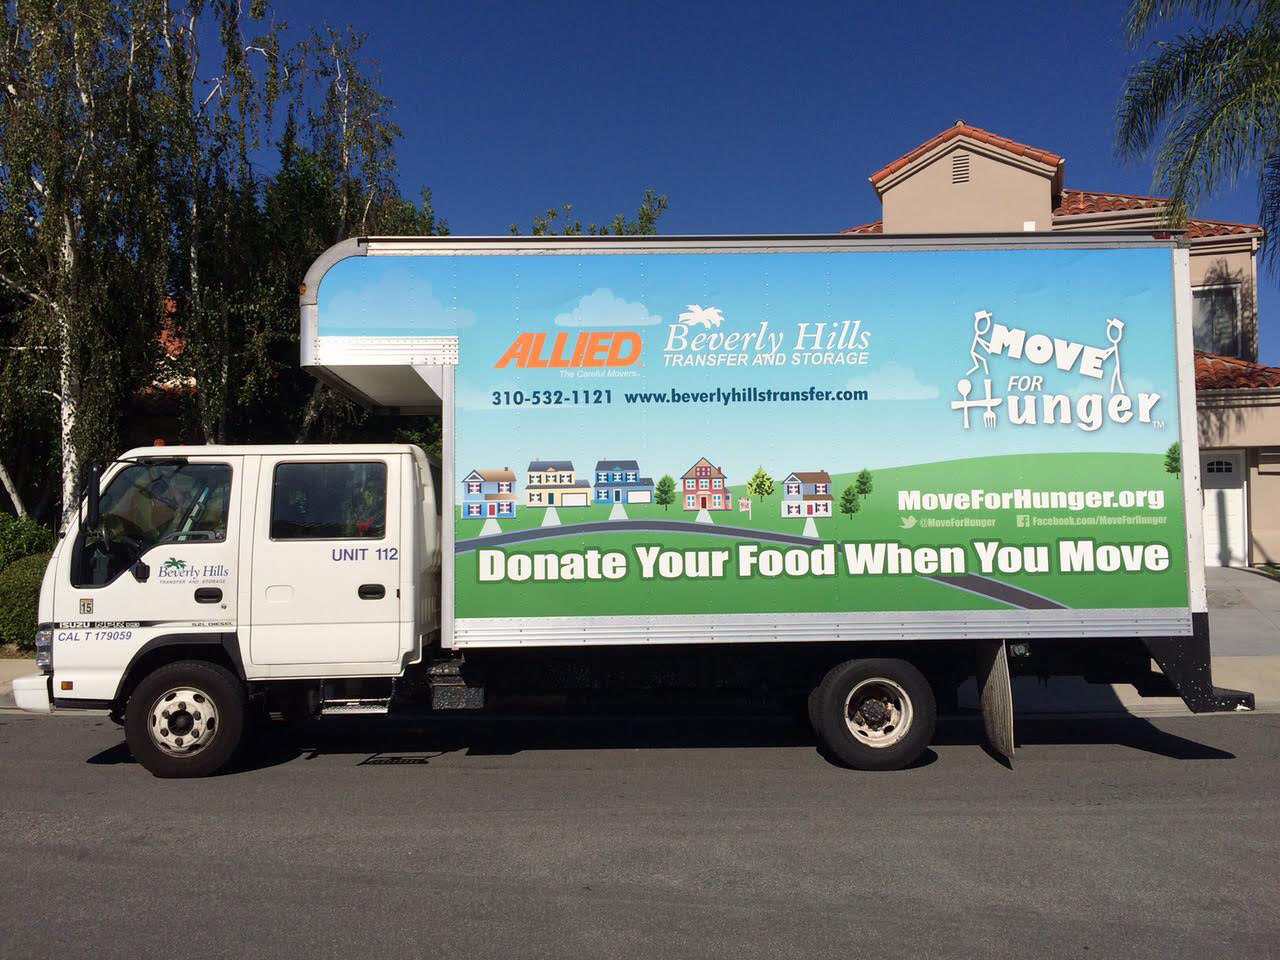 Donate your food when you move